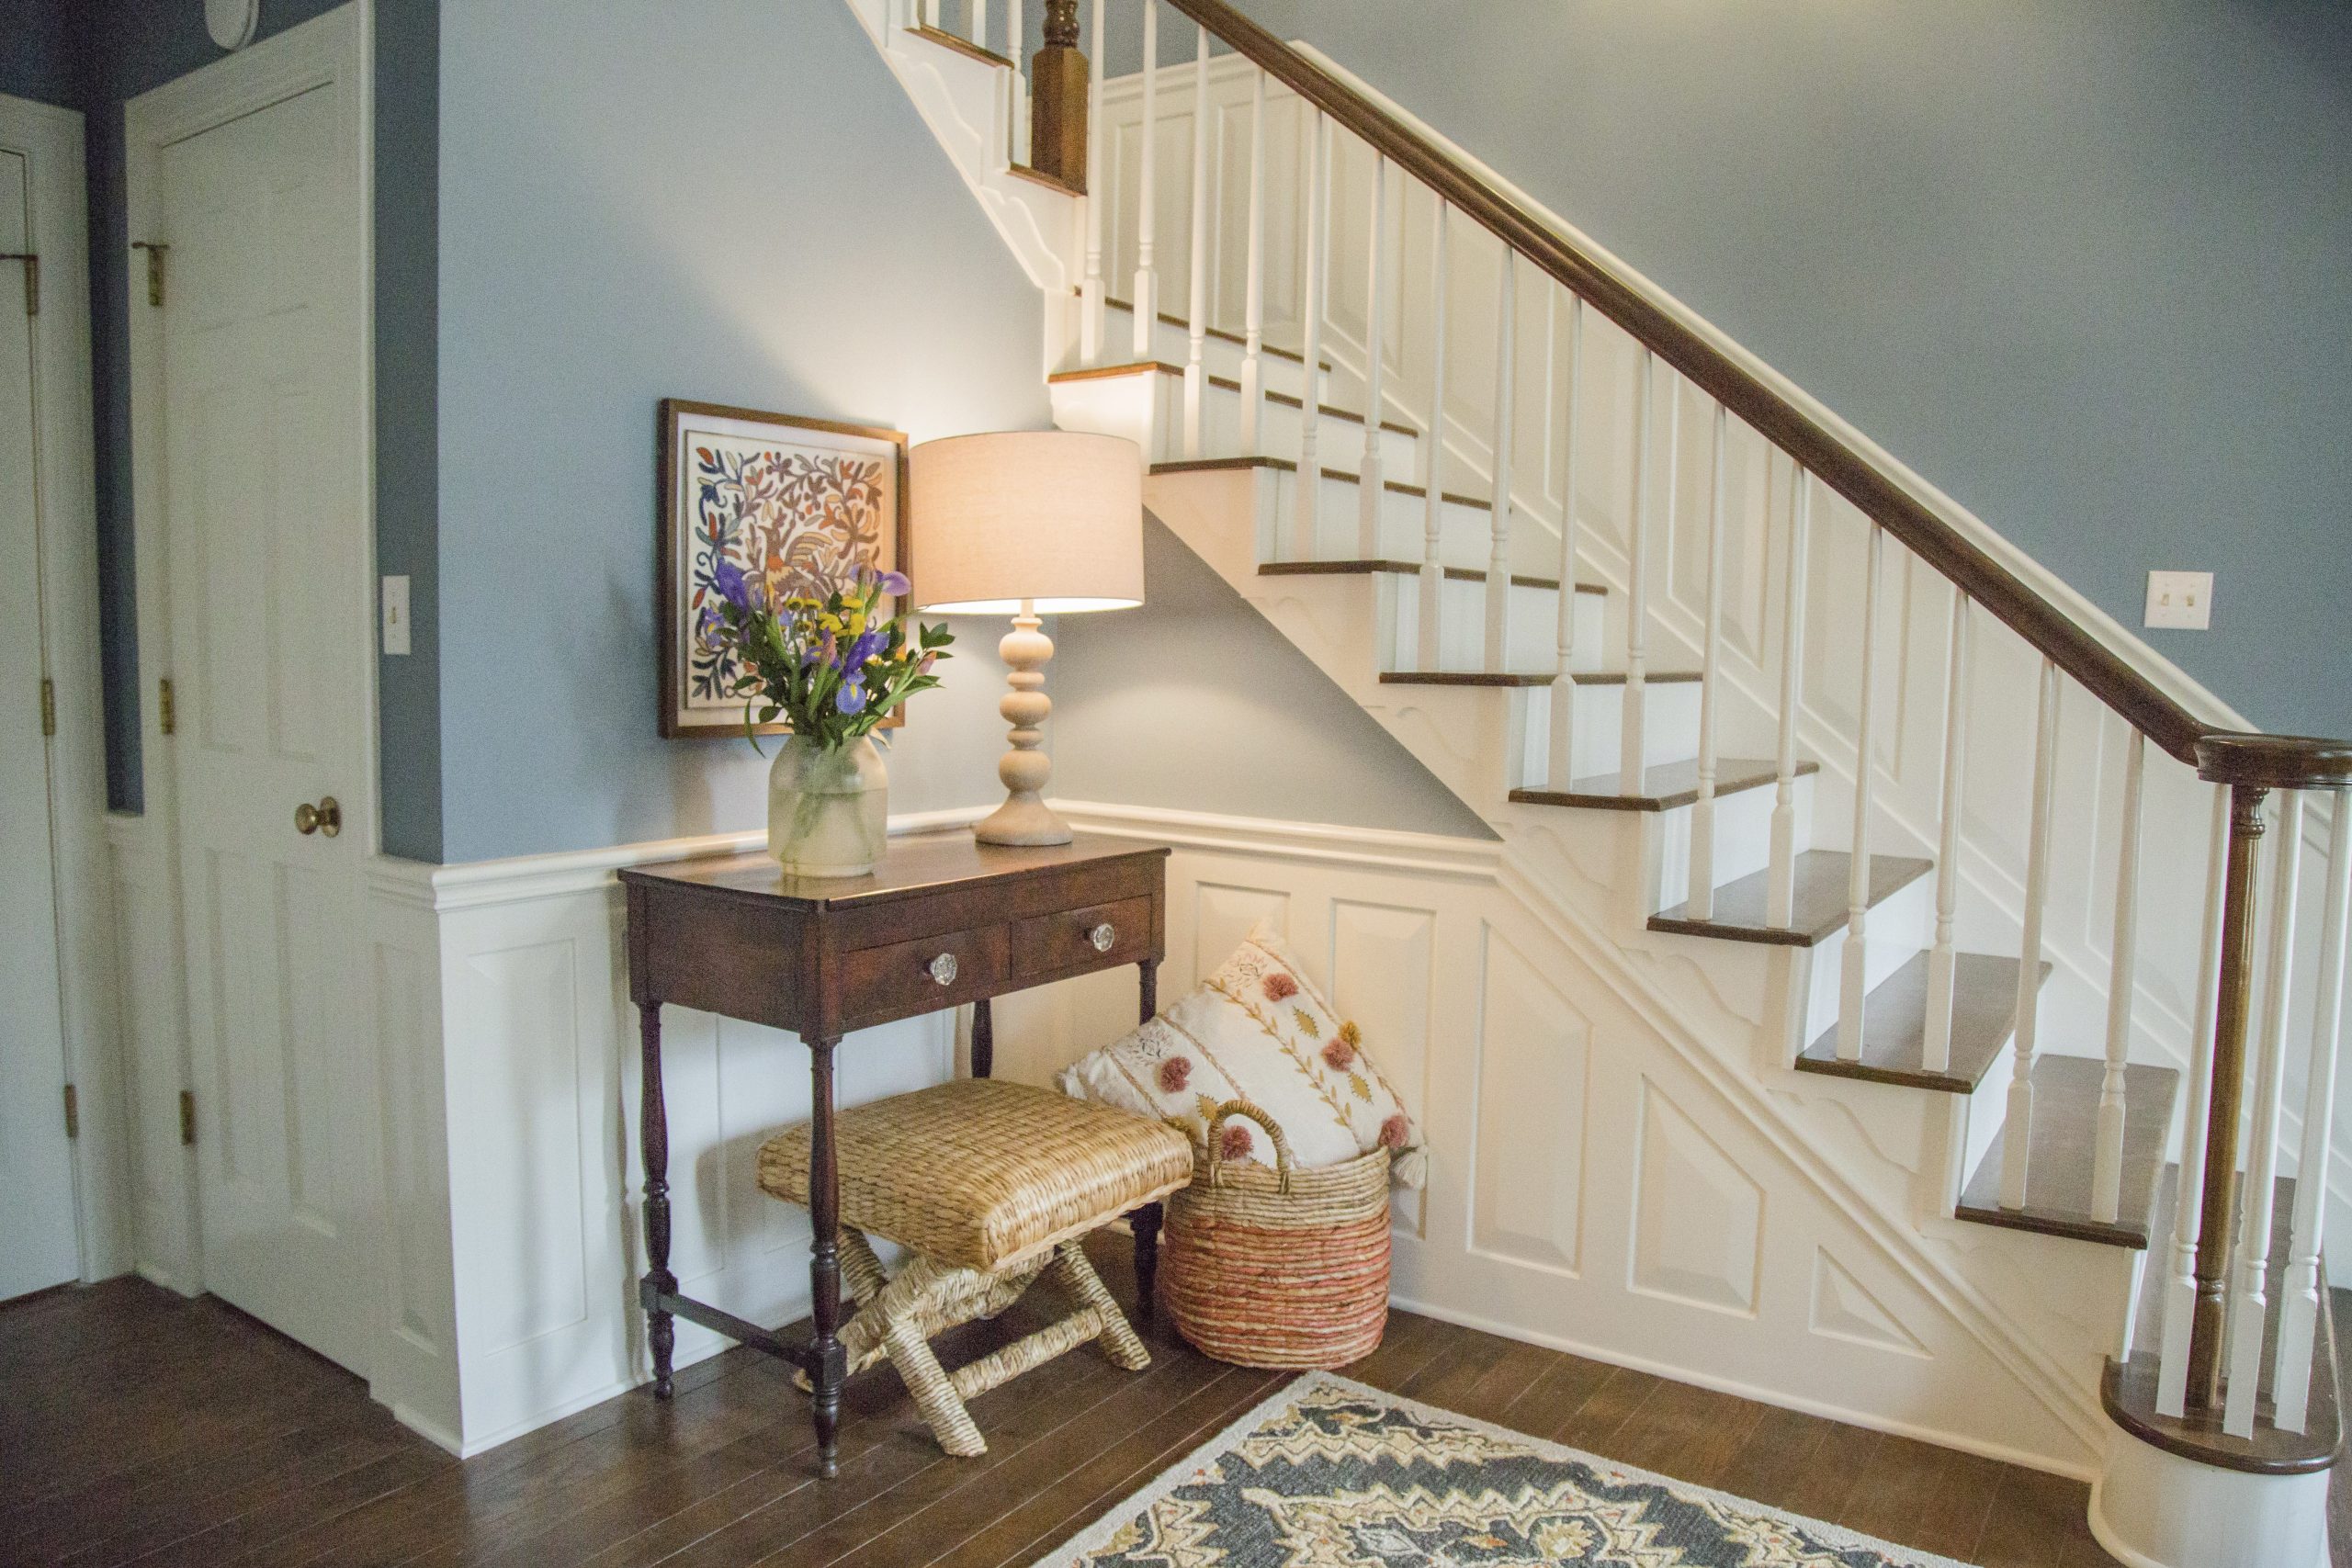 A calming blue and white entryway with traditional appeal